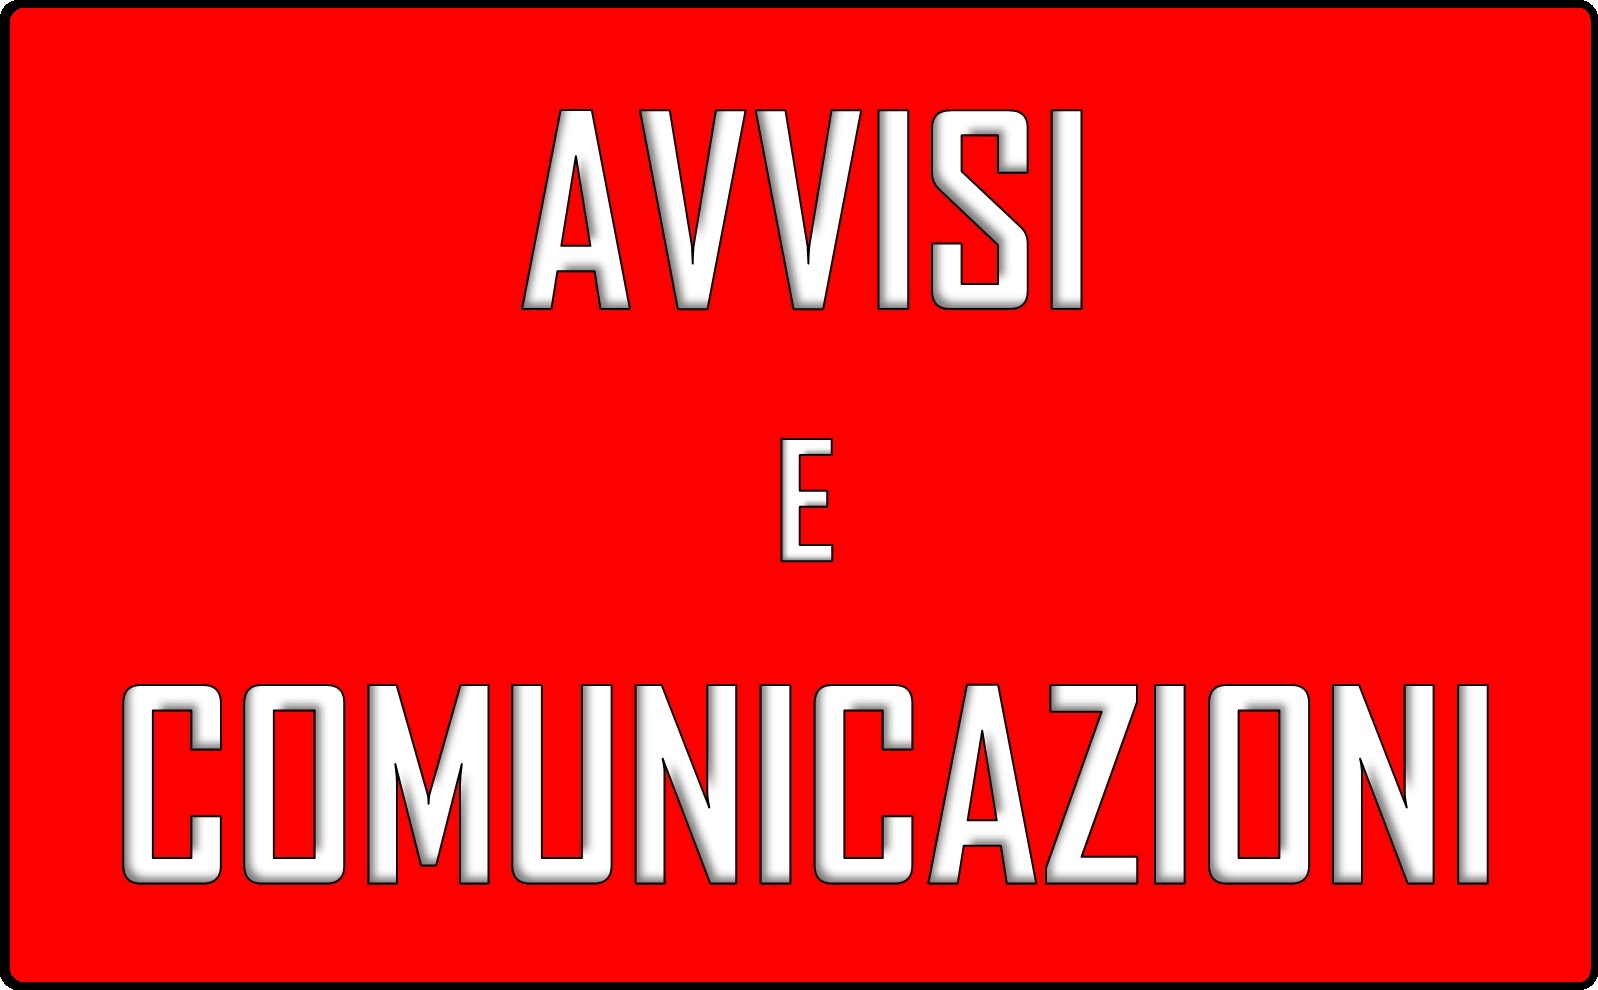 Avvisi – POLO DIDATTICO I.R.C.C.S. NEUROMED